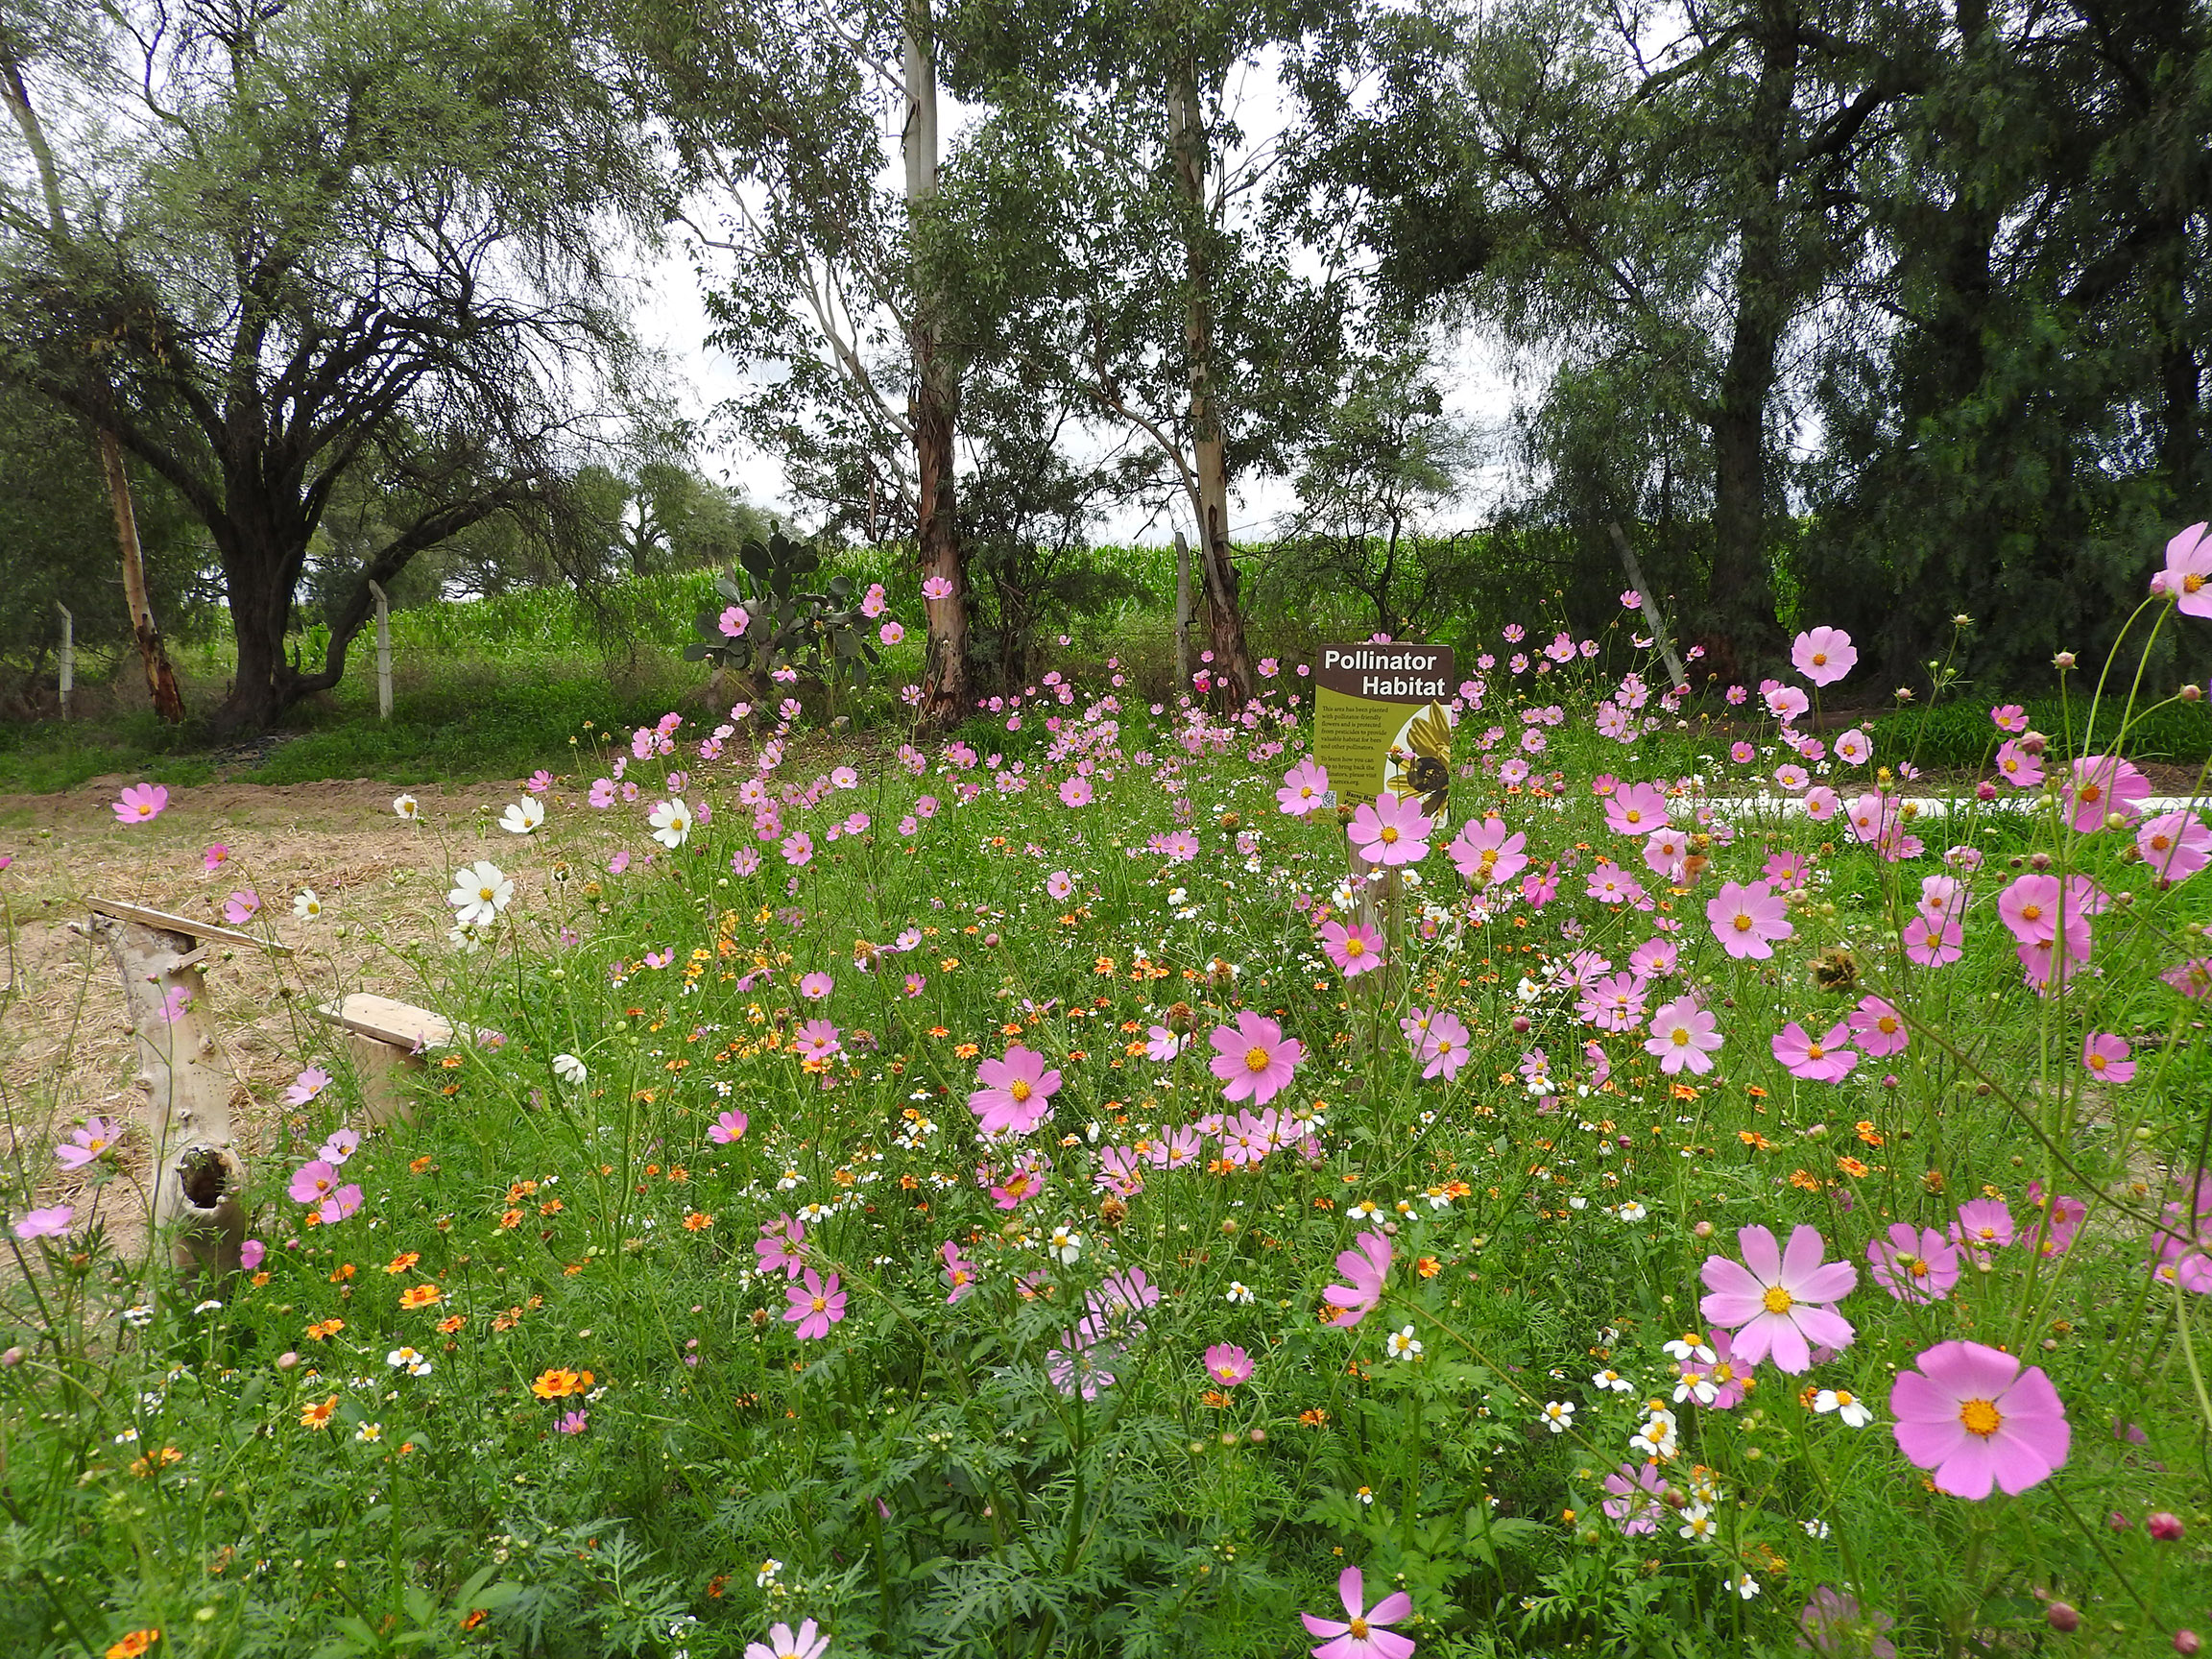 Now in full bloom, the pollinator habitat is covered in pink, white, and yellow flowers.